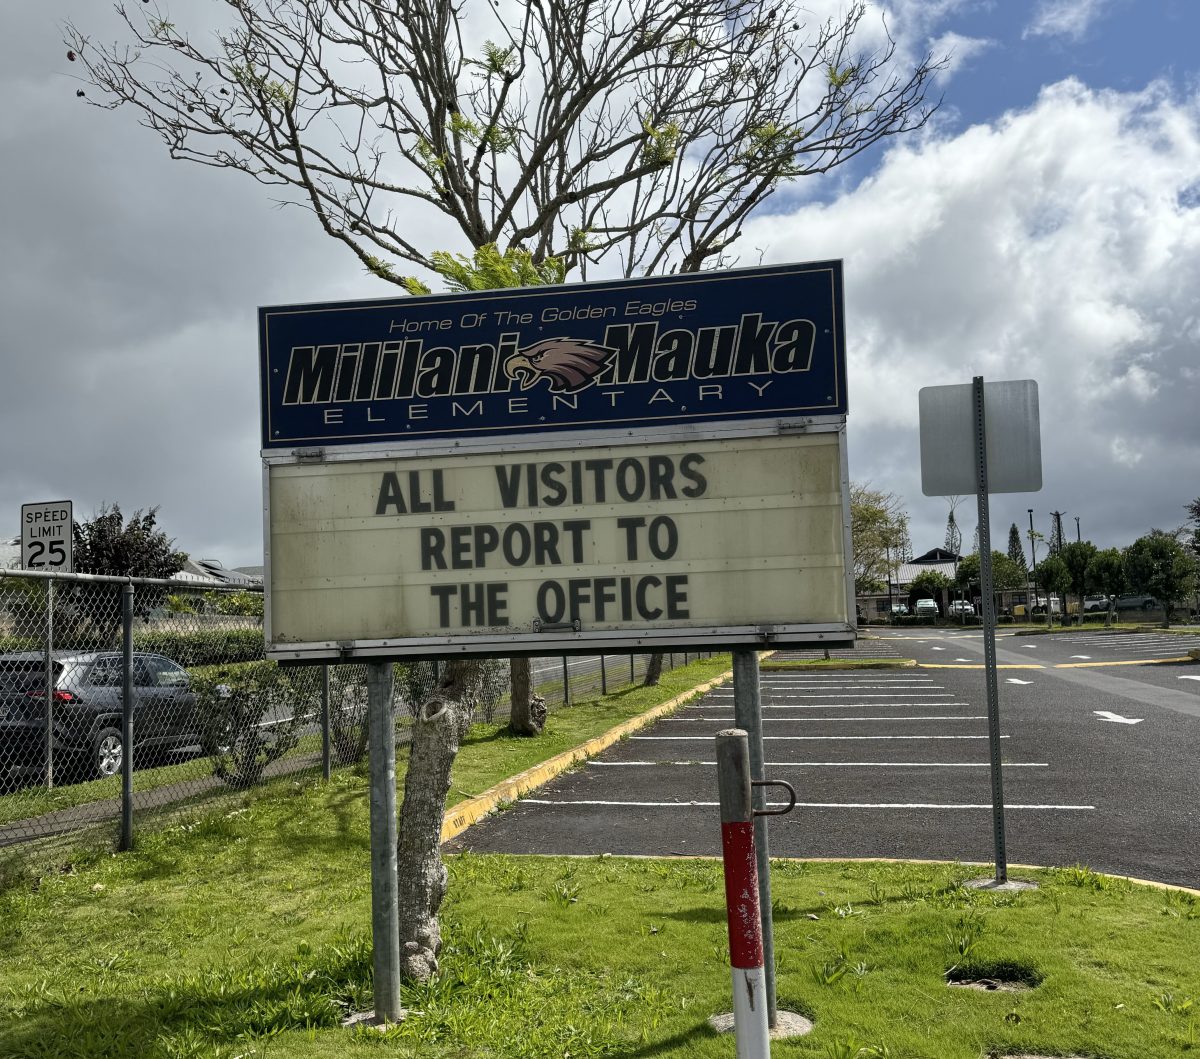 In another crime in the community, a Mililani Mauka Elementary student was allegedly chased on their way home.

AD: This photo is taken at Mililani Mauka Elementary School and primarily features the schools outdoor announcements sign. It is located in the entrance to the school parking lot. 